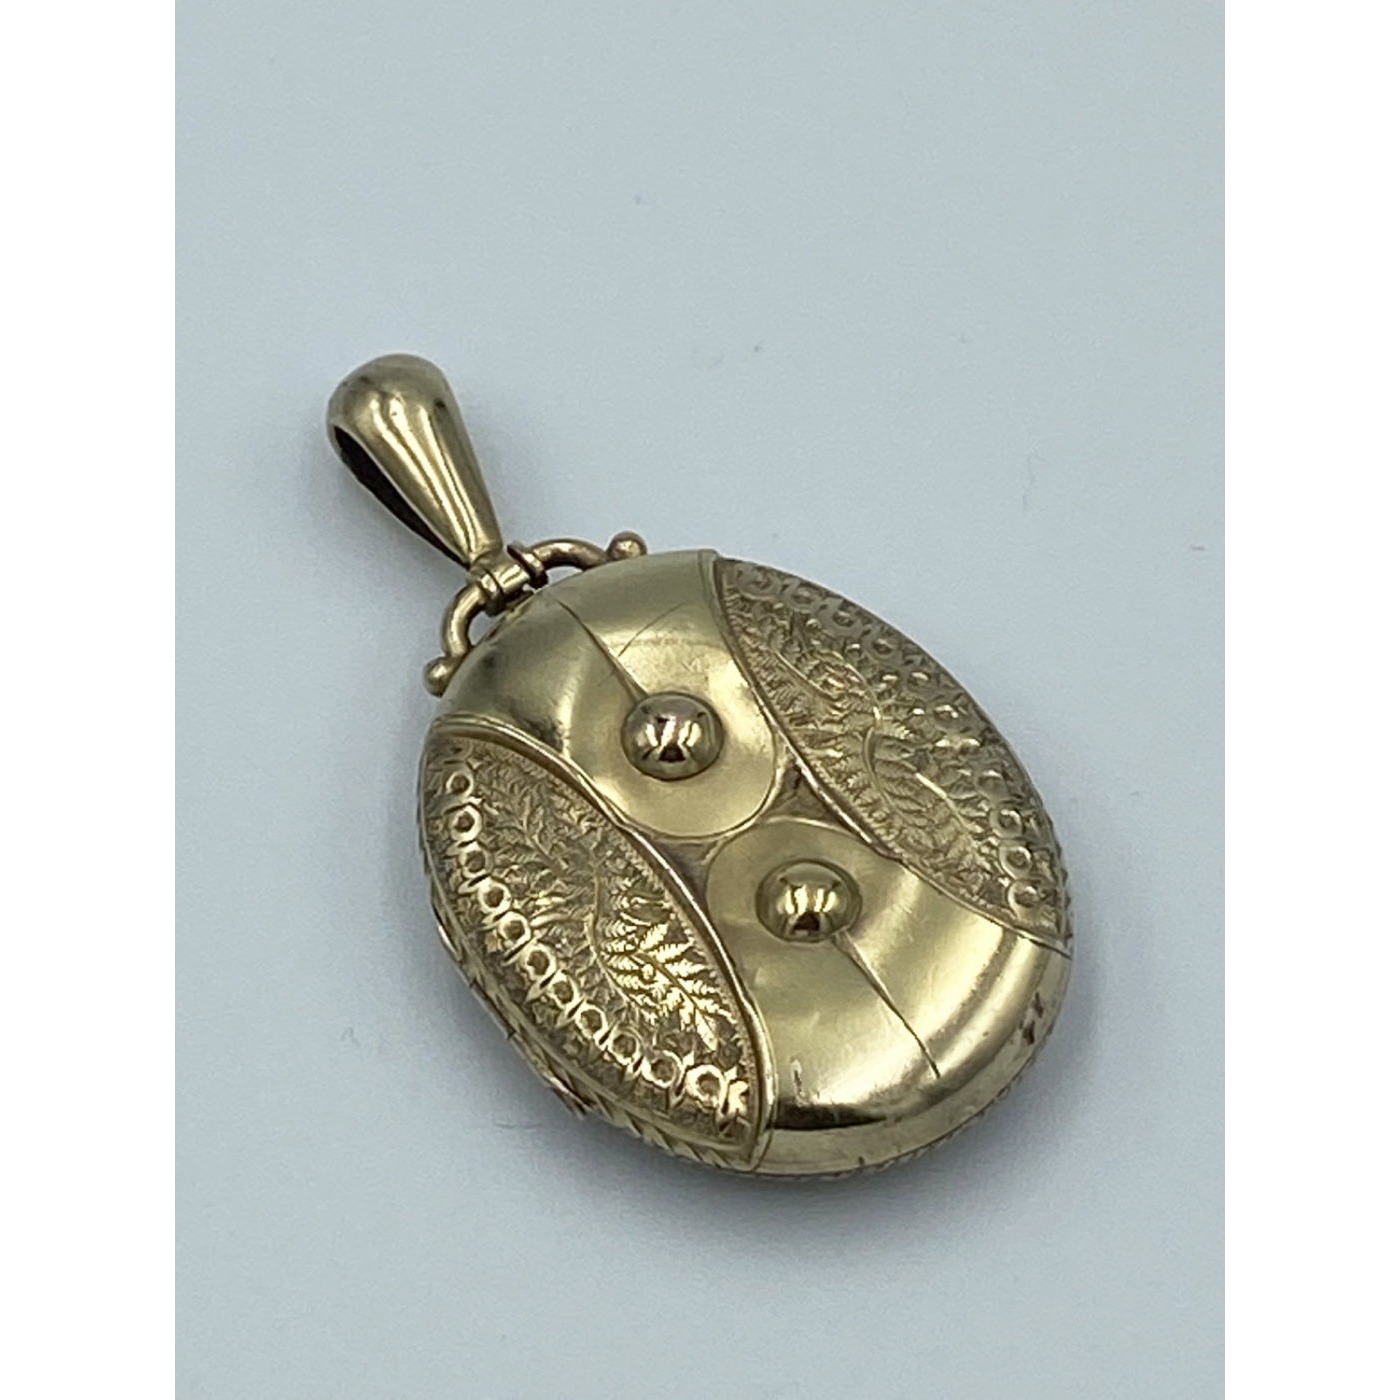 Buckle Locket with Unusual Design - Gold-Filled